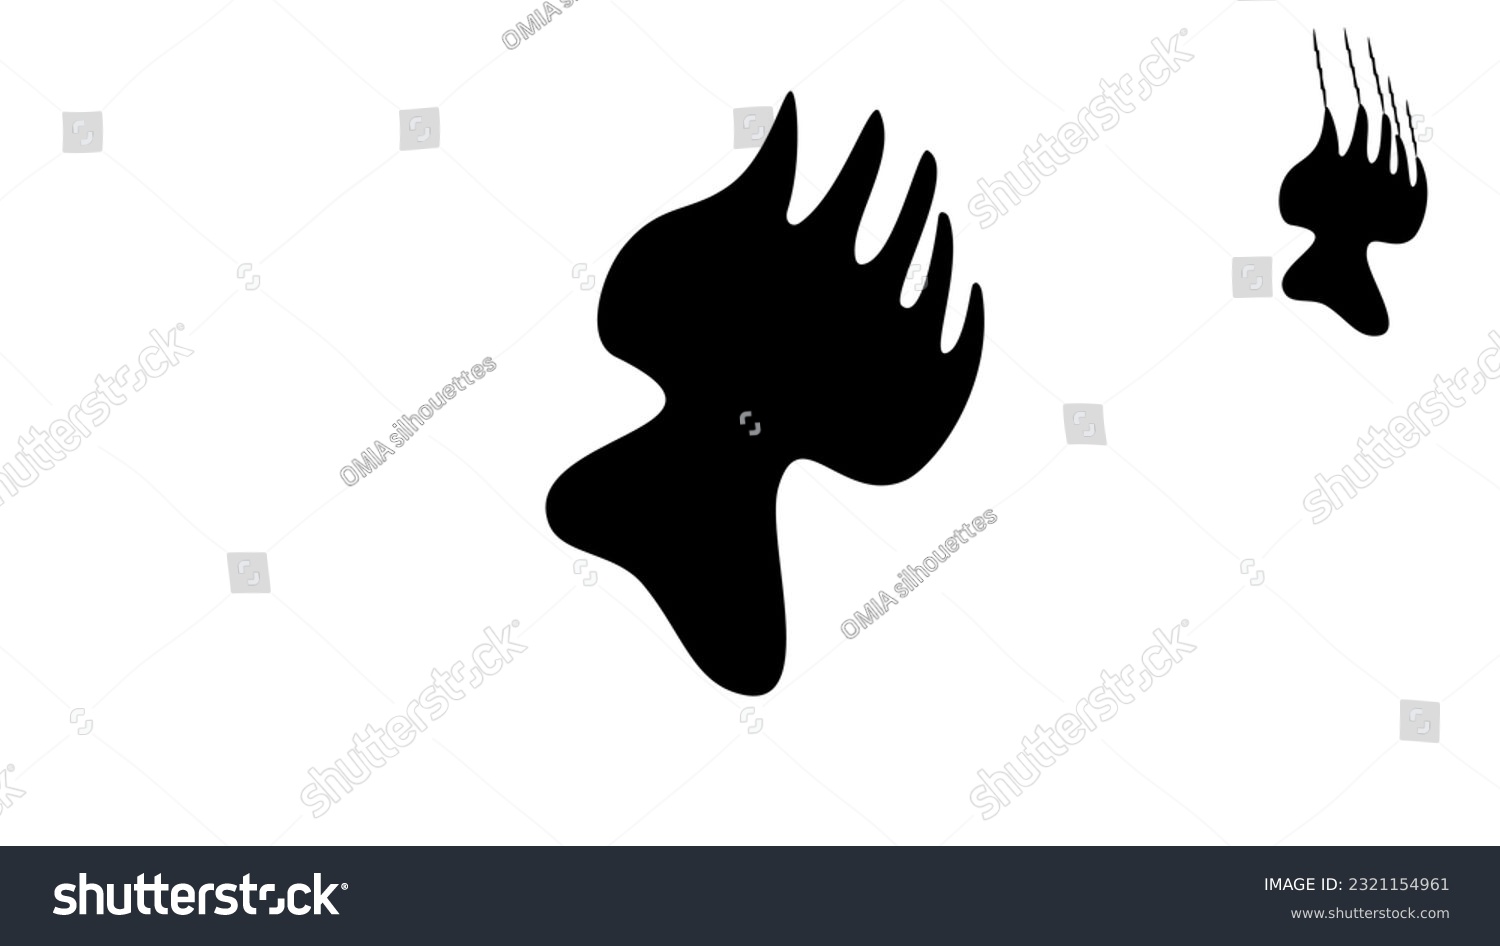 SVG of bear paw silhouette, high quality vector svg